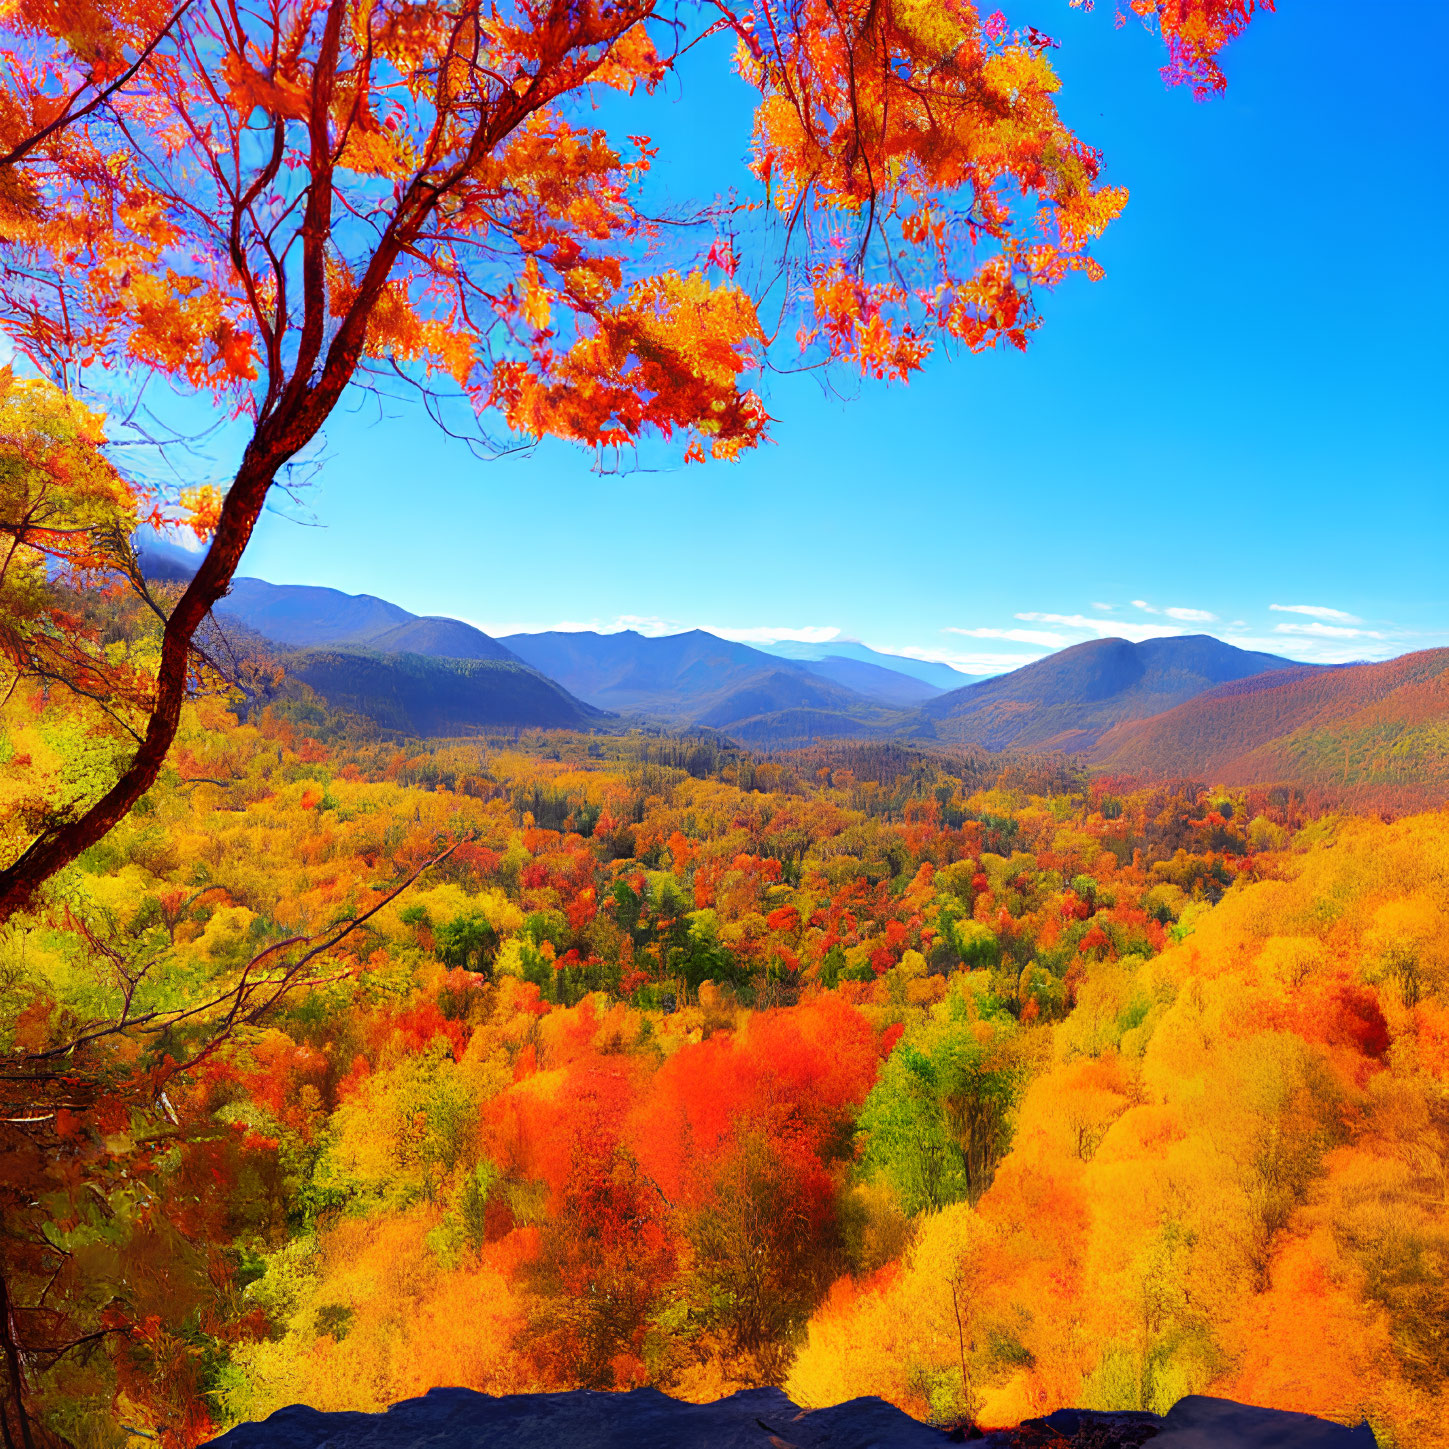 Colorful Autumn Landscape with Mountain Range View